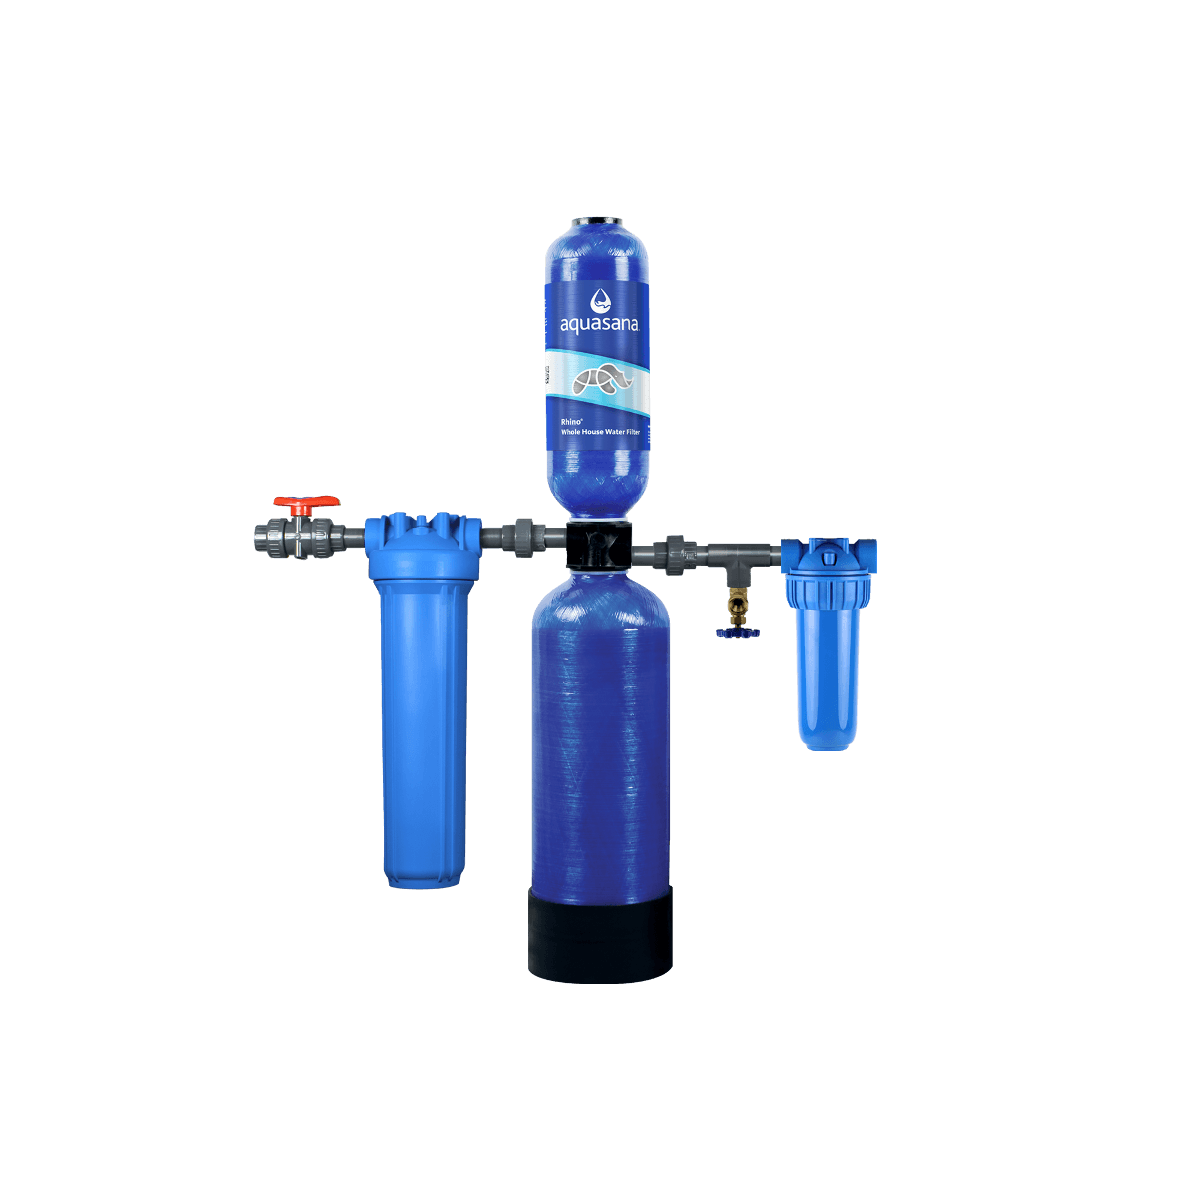 Rhino Whole House Water Filter System Home Water Filtration 10/1,000,000 Aquasana photo